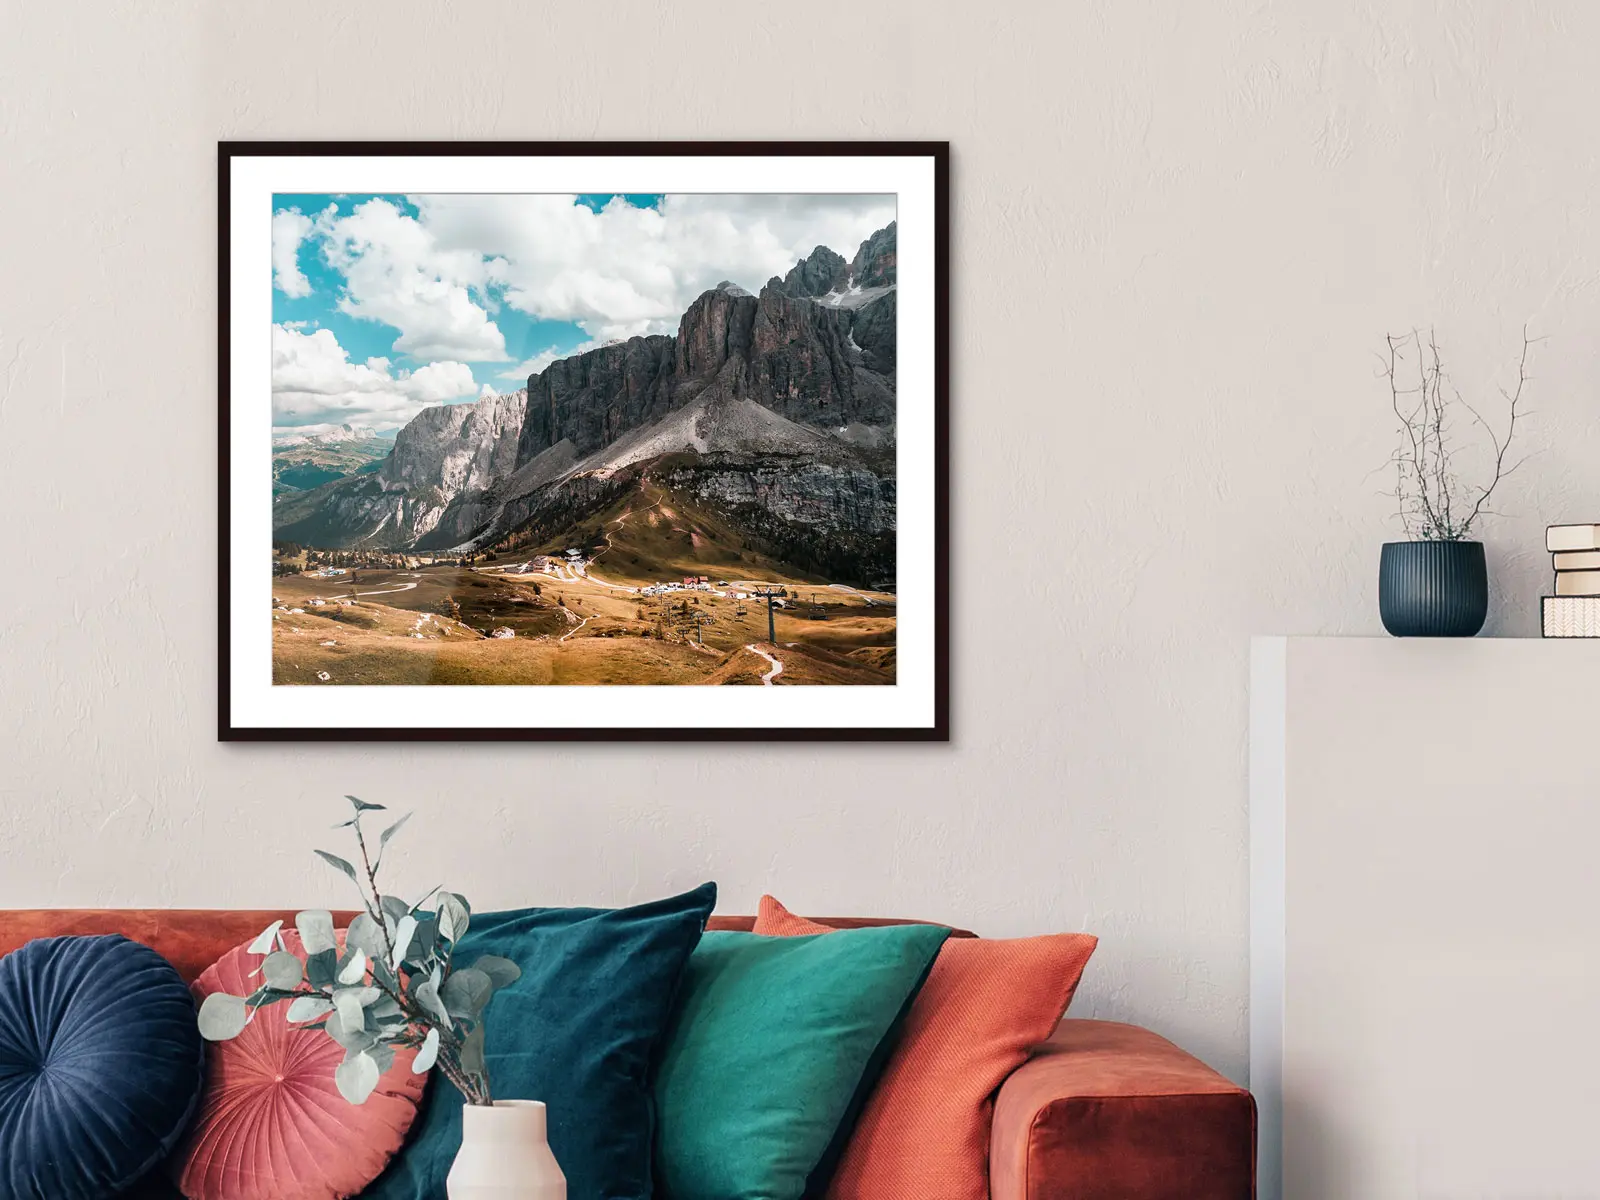 mountainscape as a lamda print on fuji crystal DP II paper in a frame hanging on a wall.